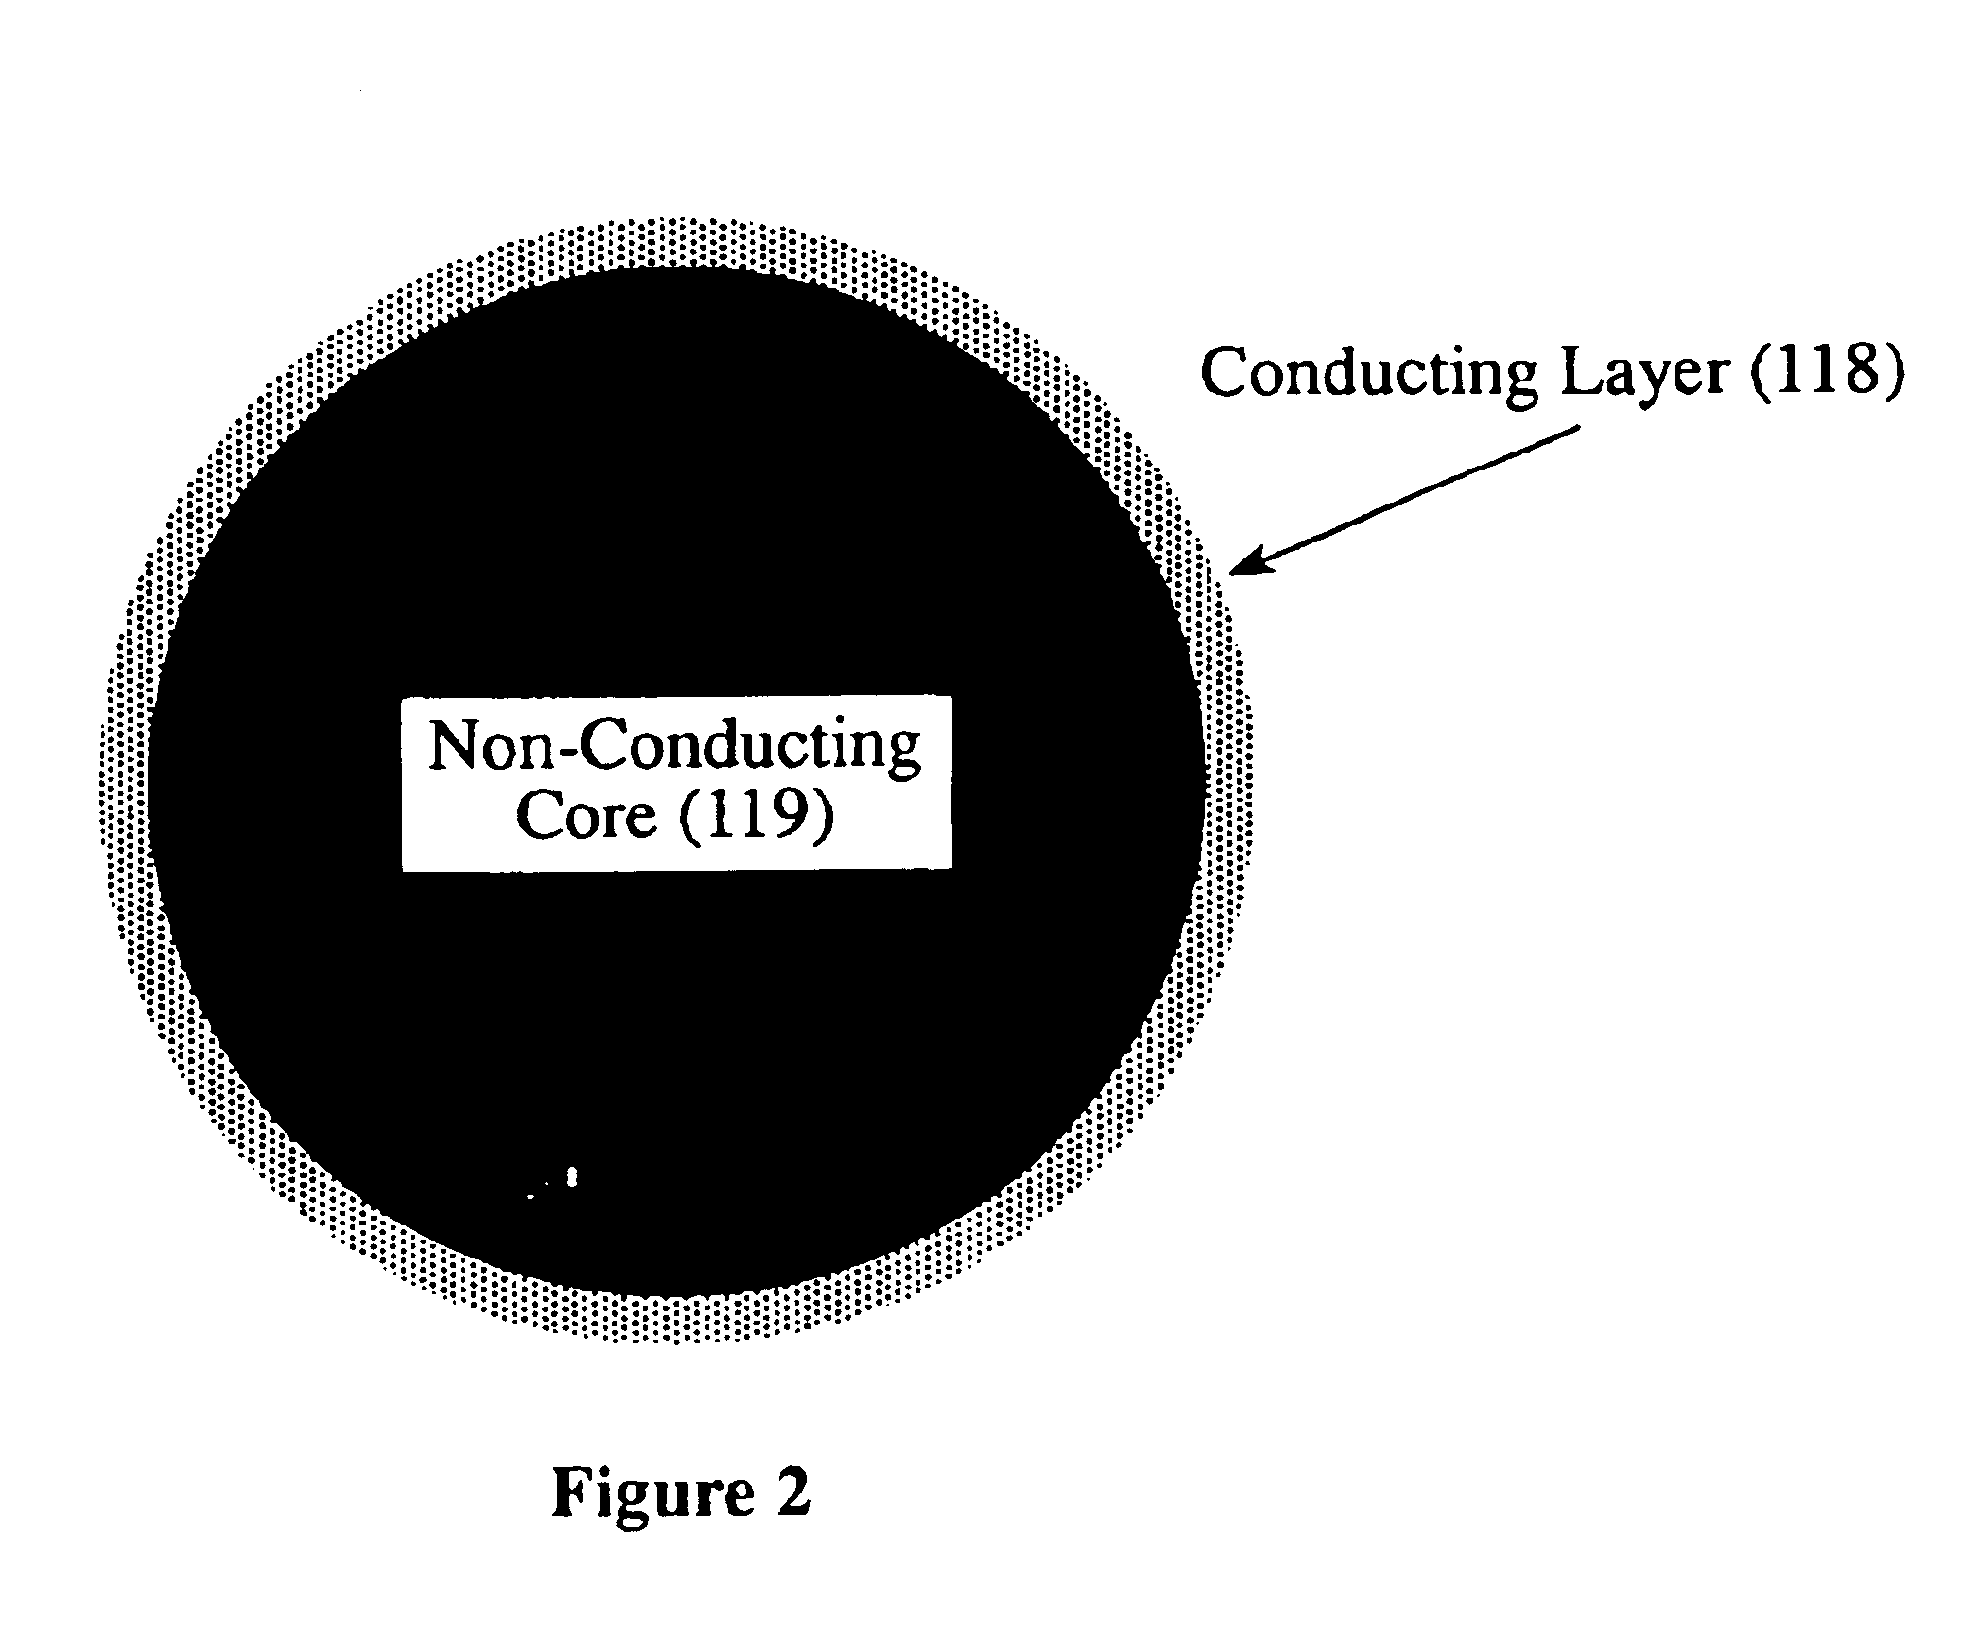 Nuclear fusion reactor incorporating spherical electromagnetic fields to contain and extract energy